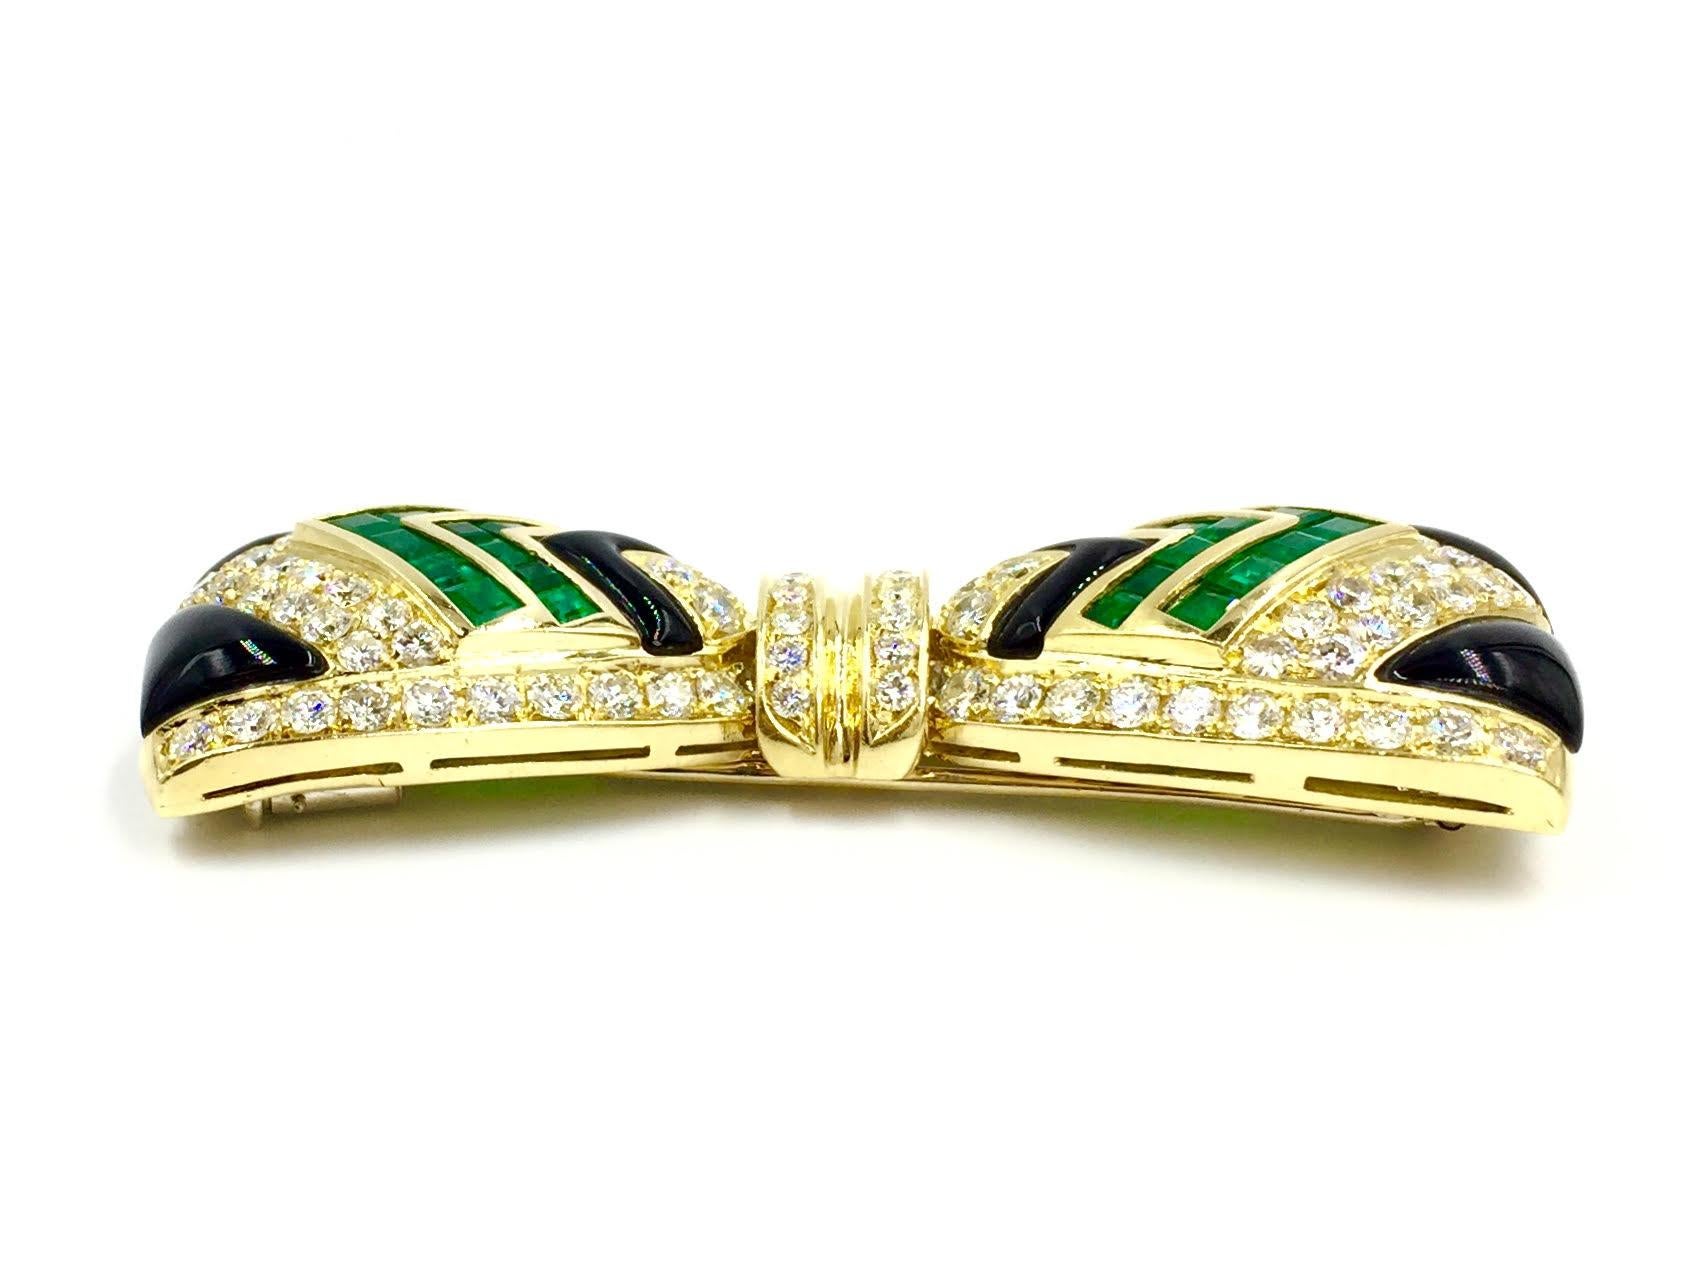 Diamond, Emerald and Onyx 18 Karat Large Bow Brooch by Giovane In Excellent Condition For Sale In Pikesville, MD